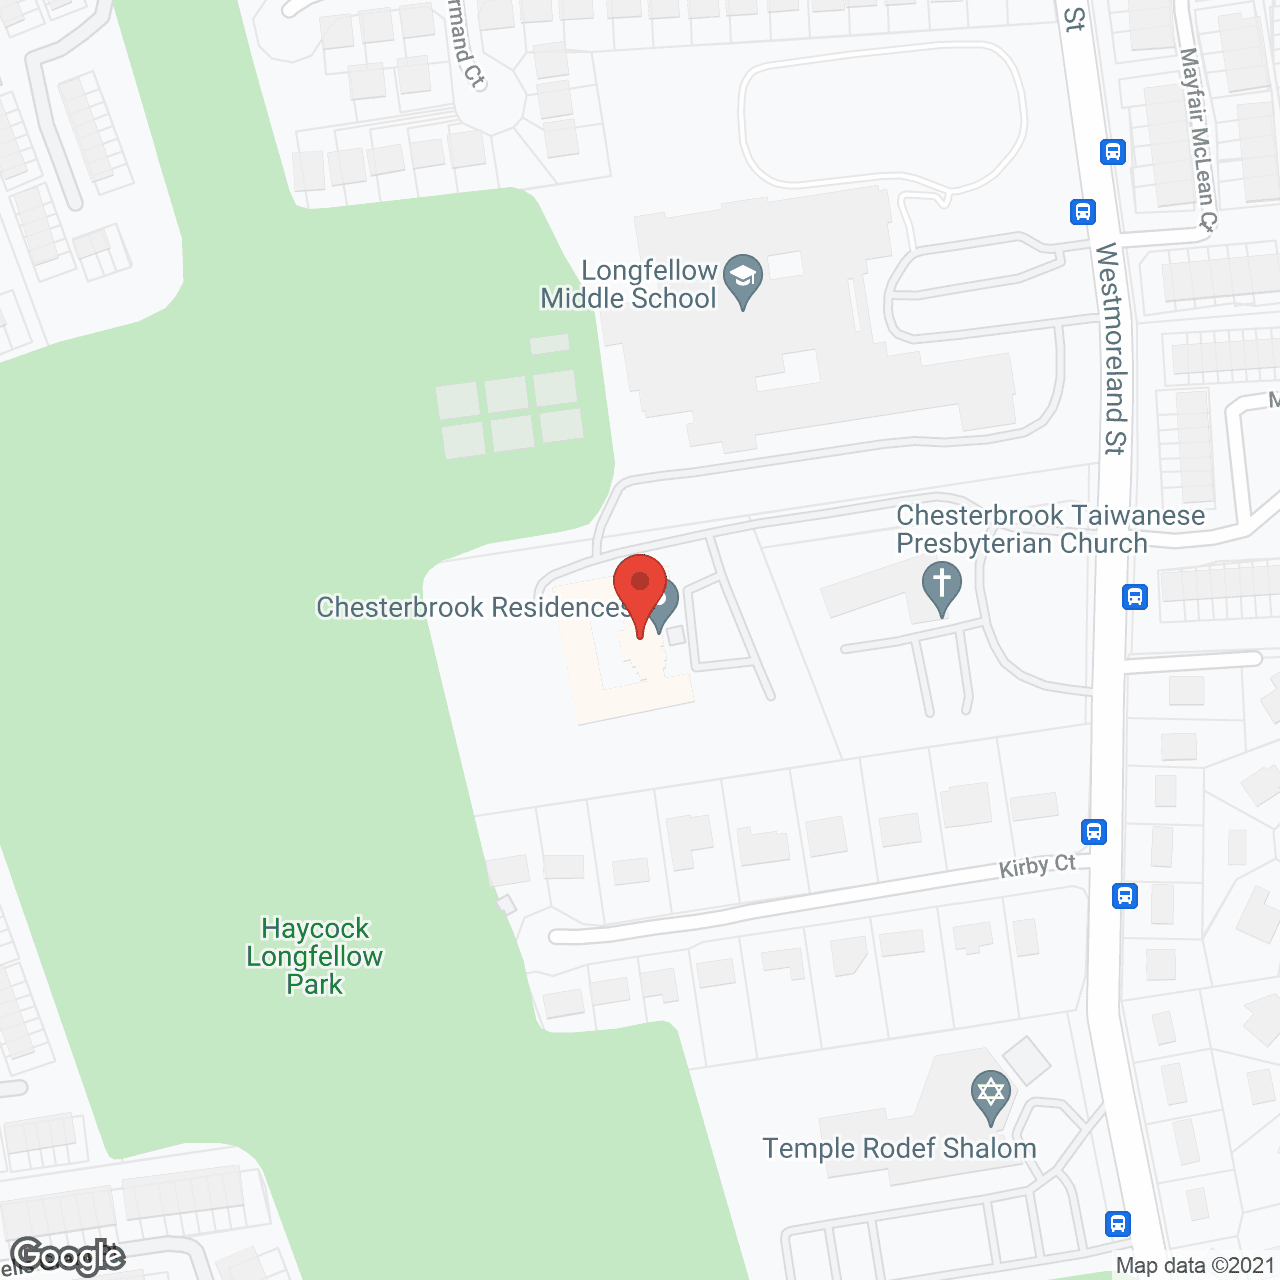 Chesterbrook Residences in google map